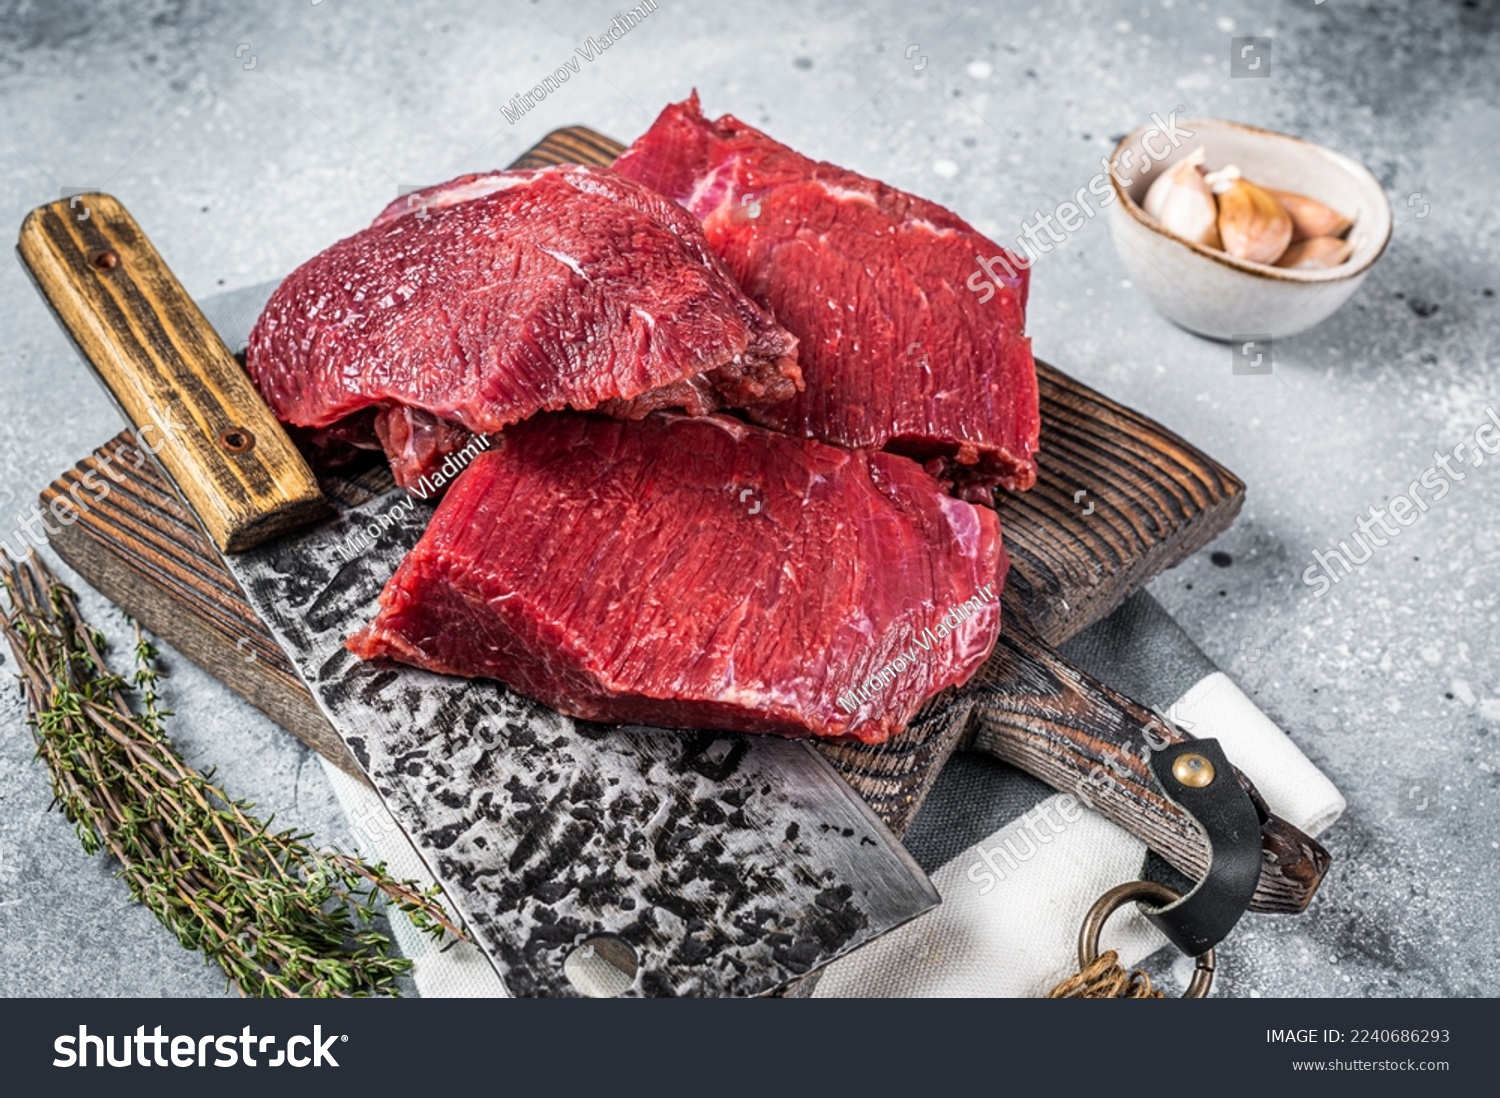 Raw Venison dear meat on butcher cutting board, game meat. Gray background. Top view. #2240686293